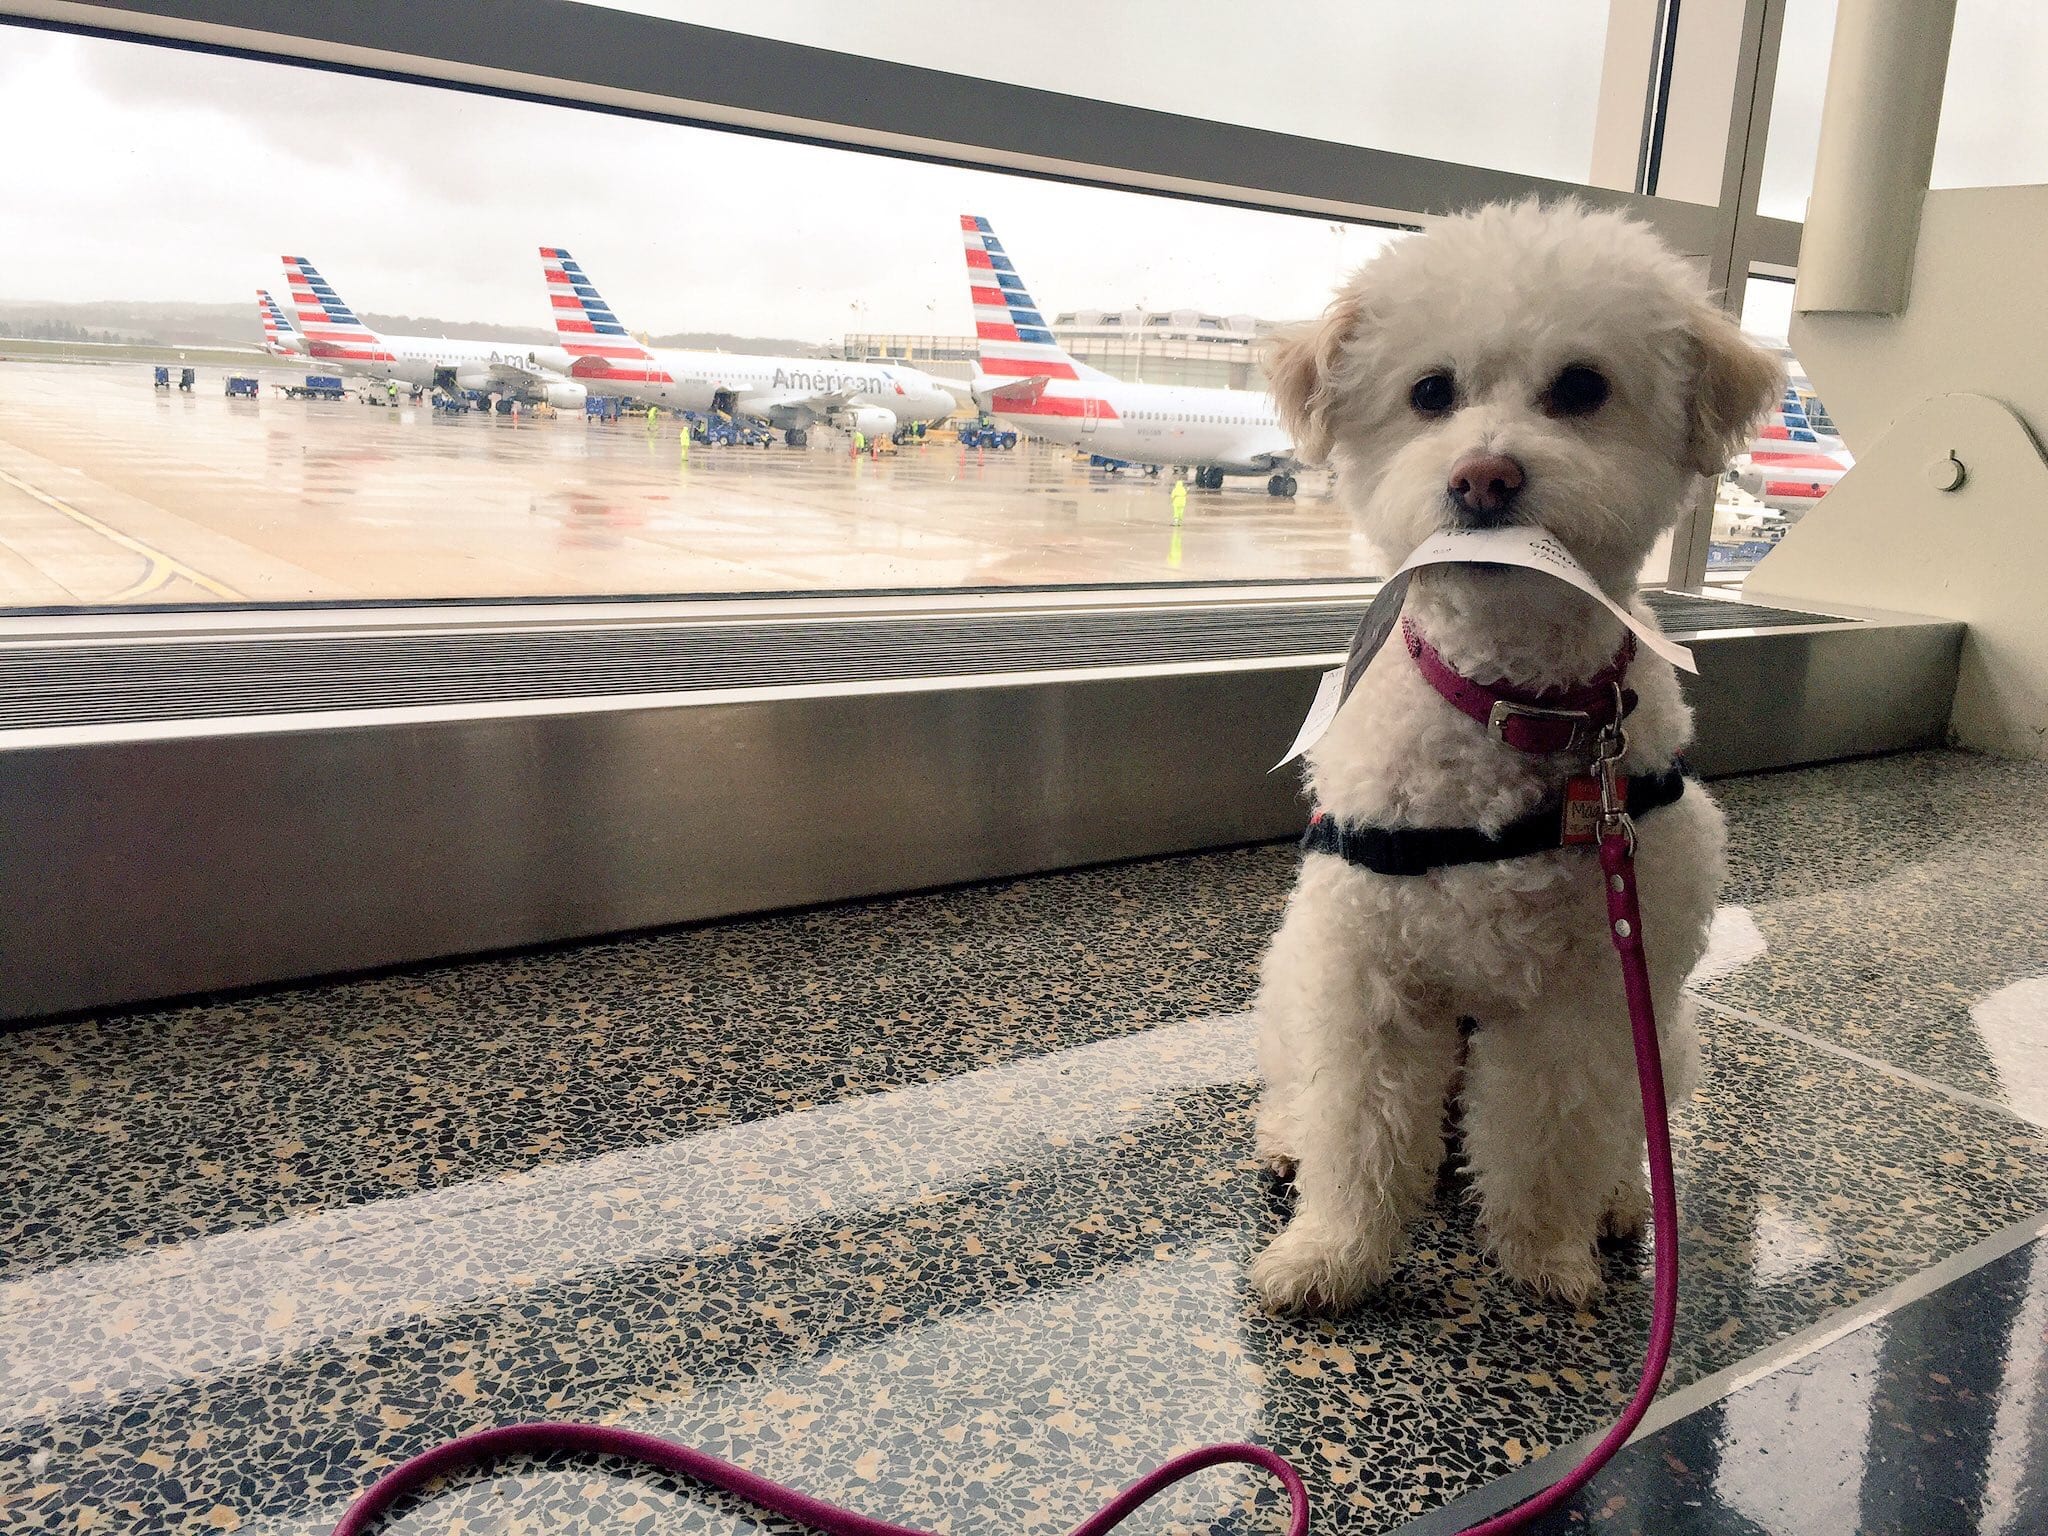 Our big list of tips for traveling with your dog